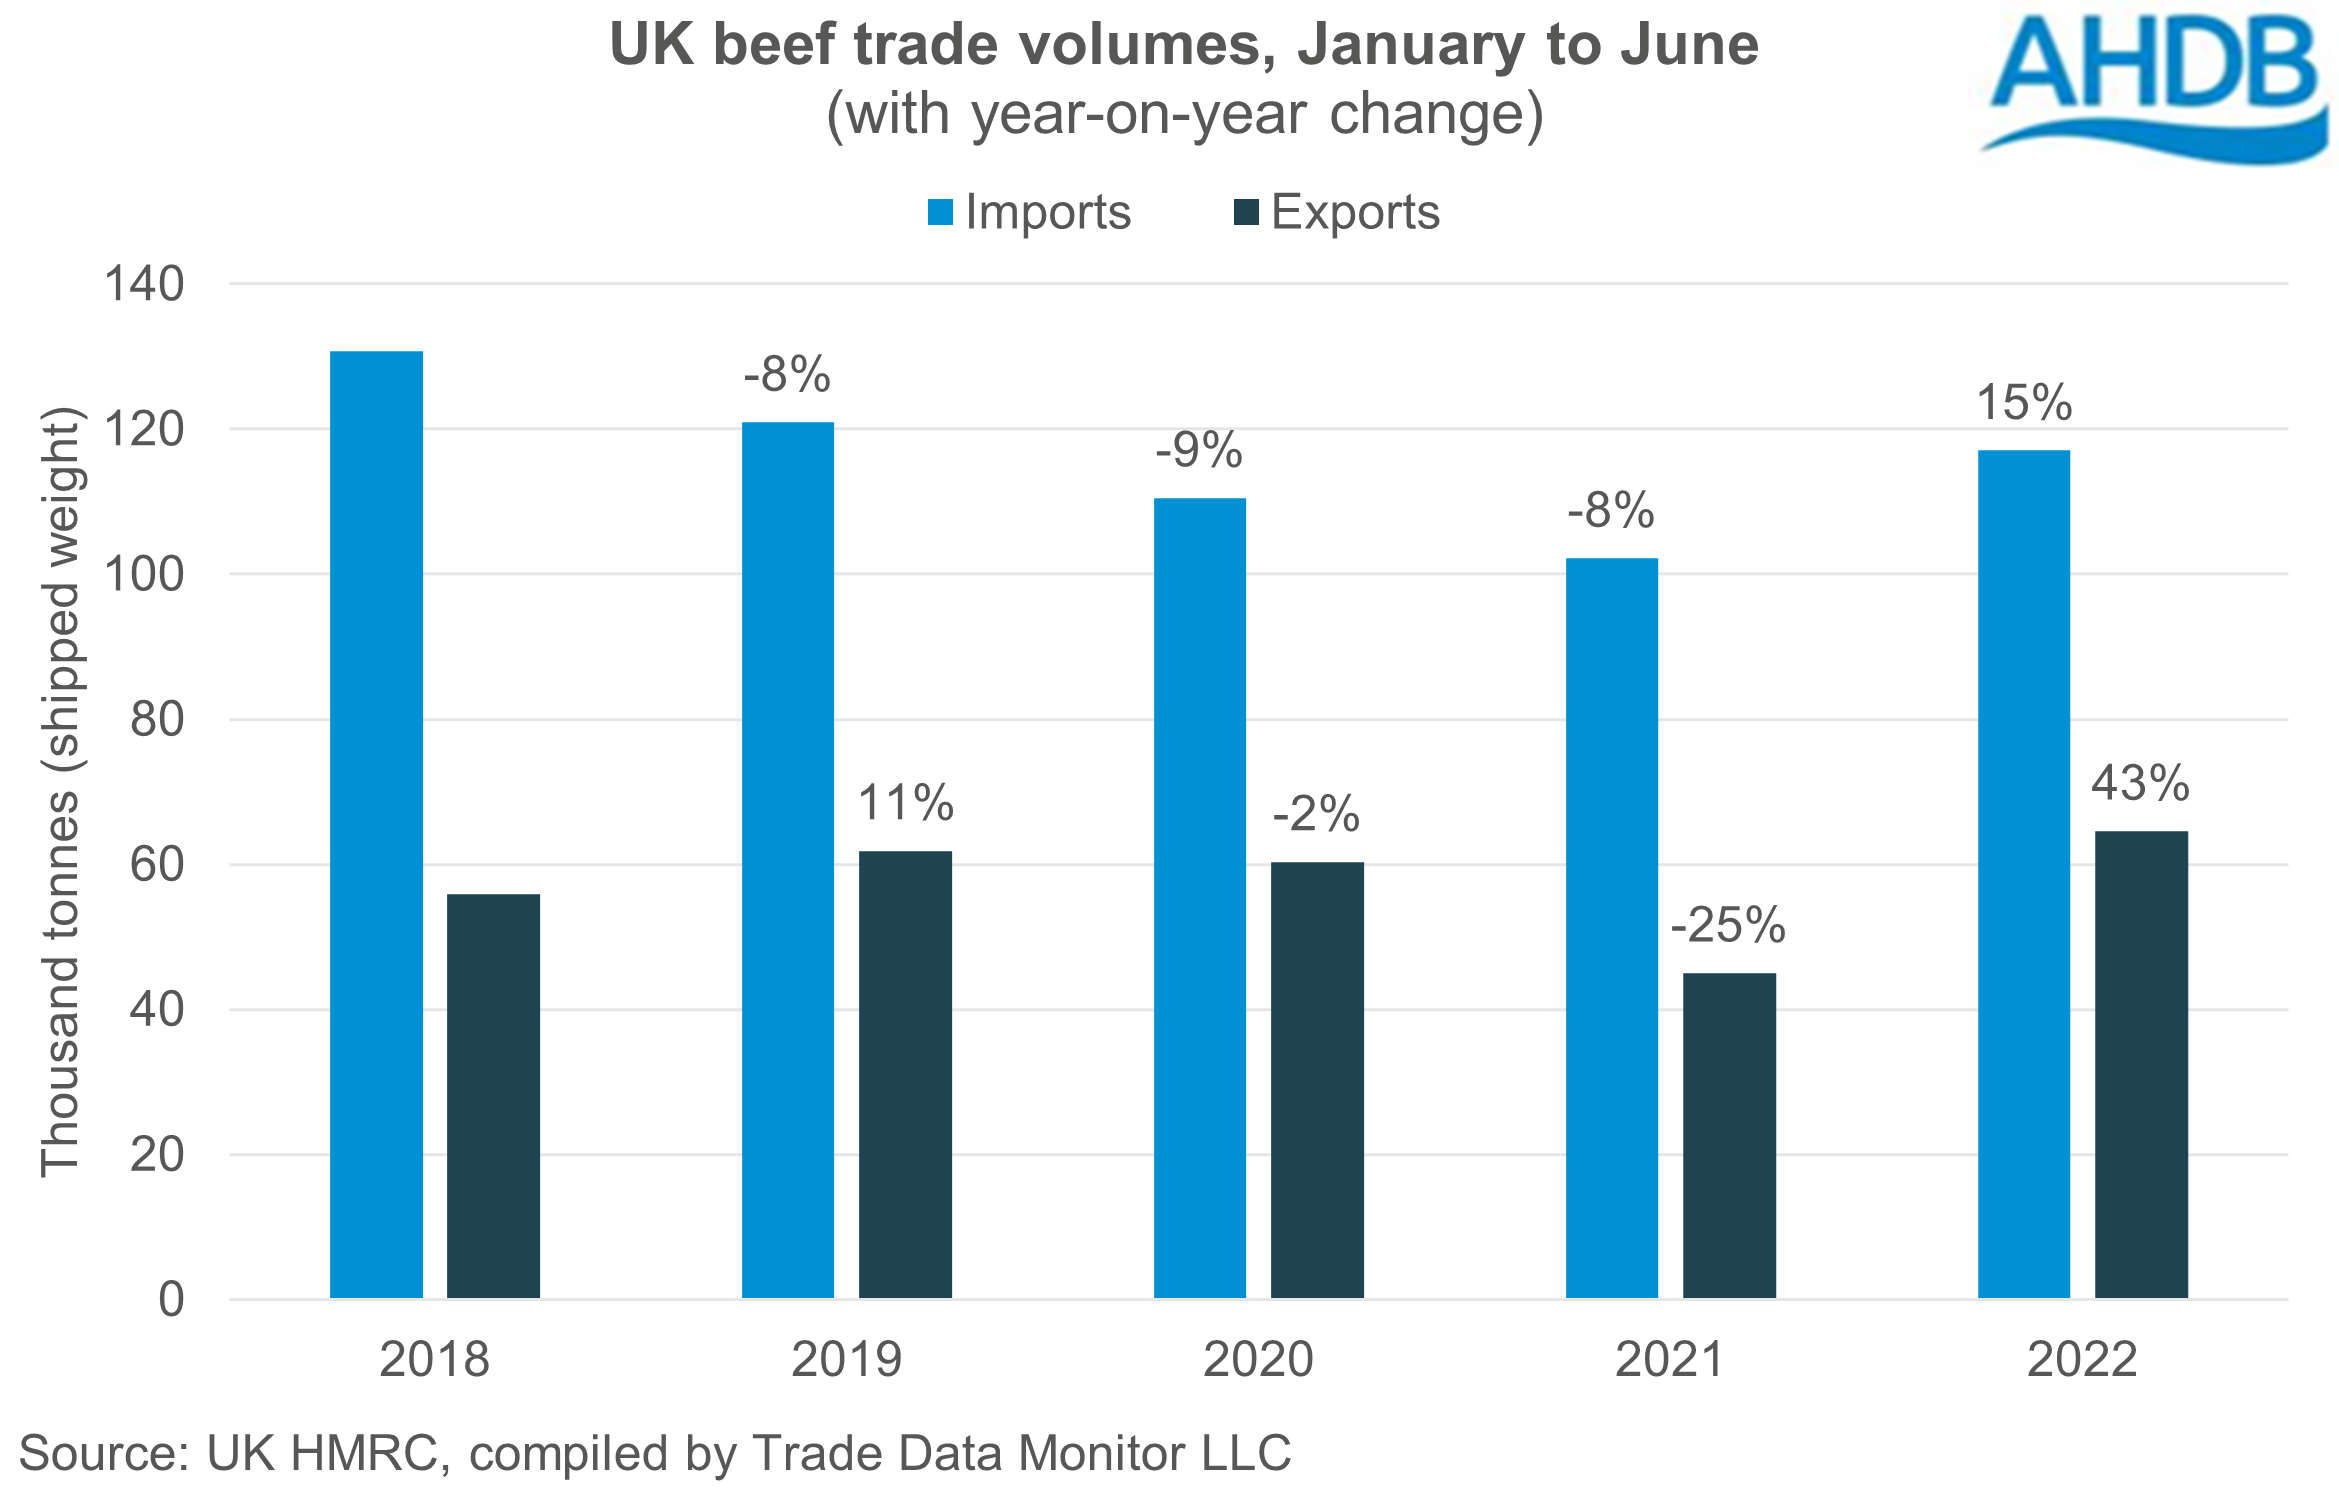 Chart showing UK beef imports and exports for 2022 Jan-Jun